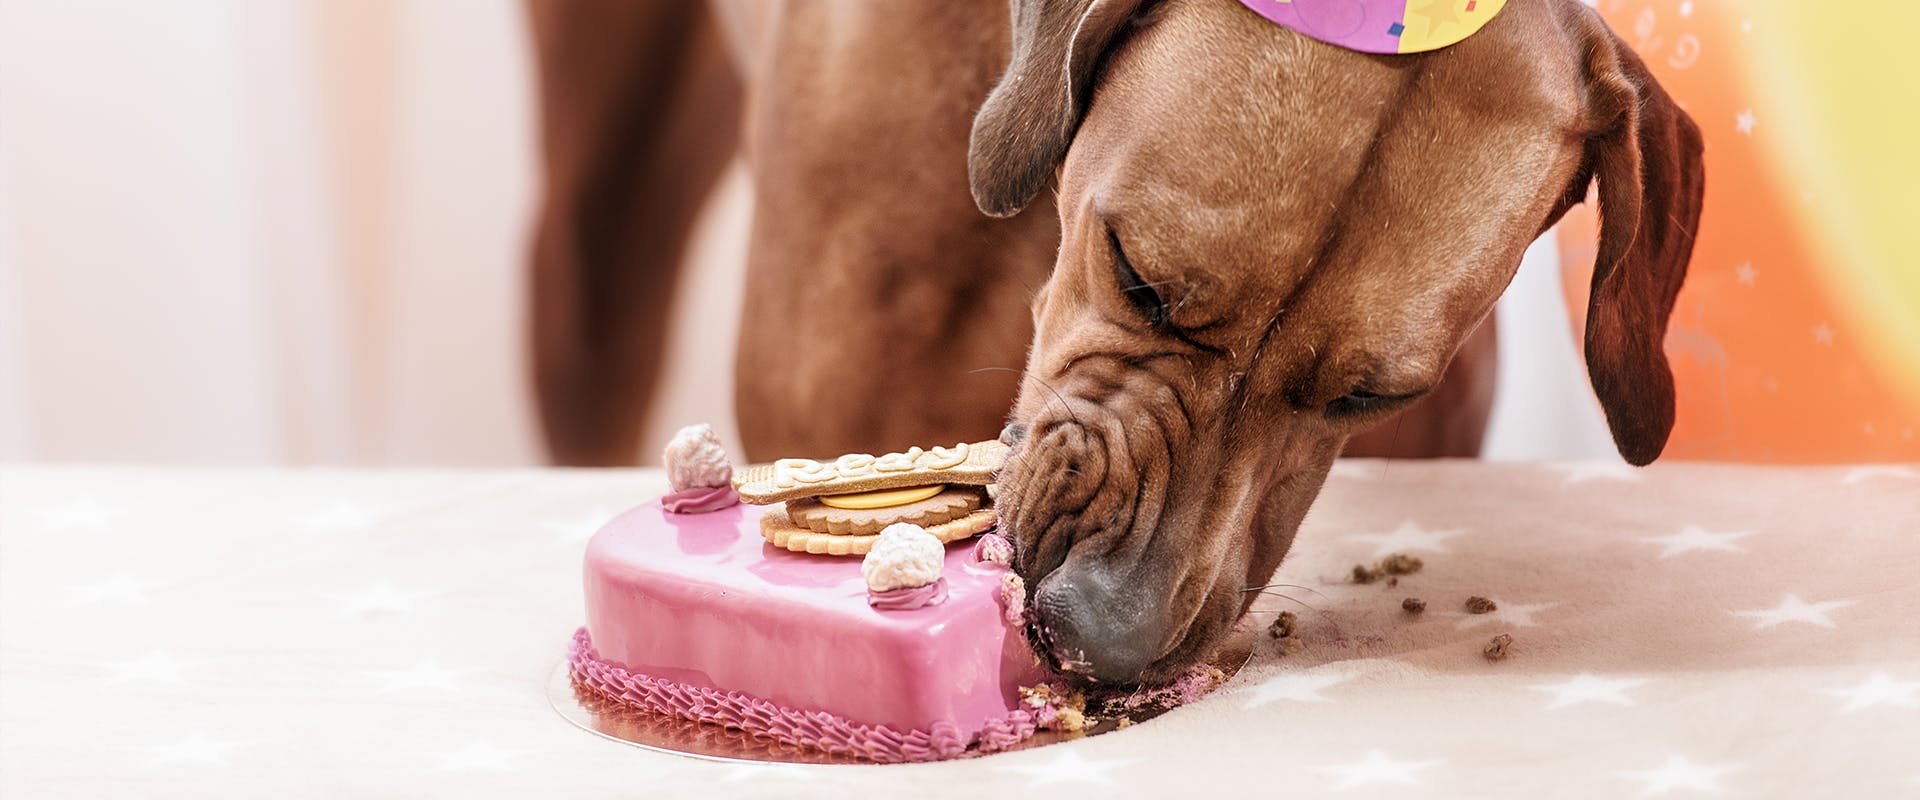 A dog wearing a party hat, eating a bright pink dog birthday cake